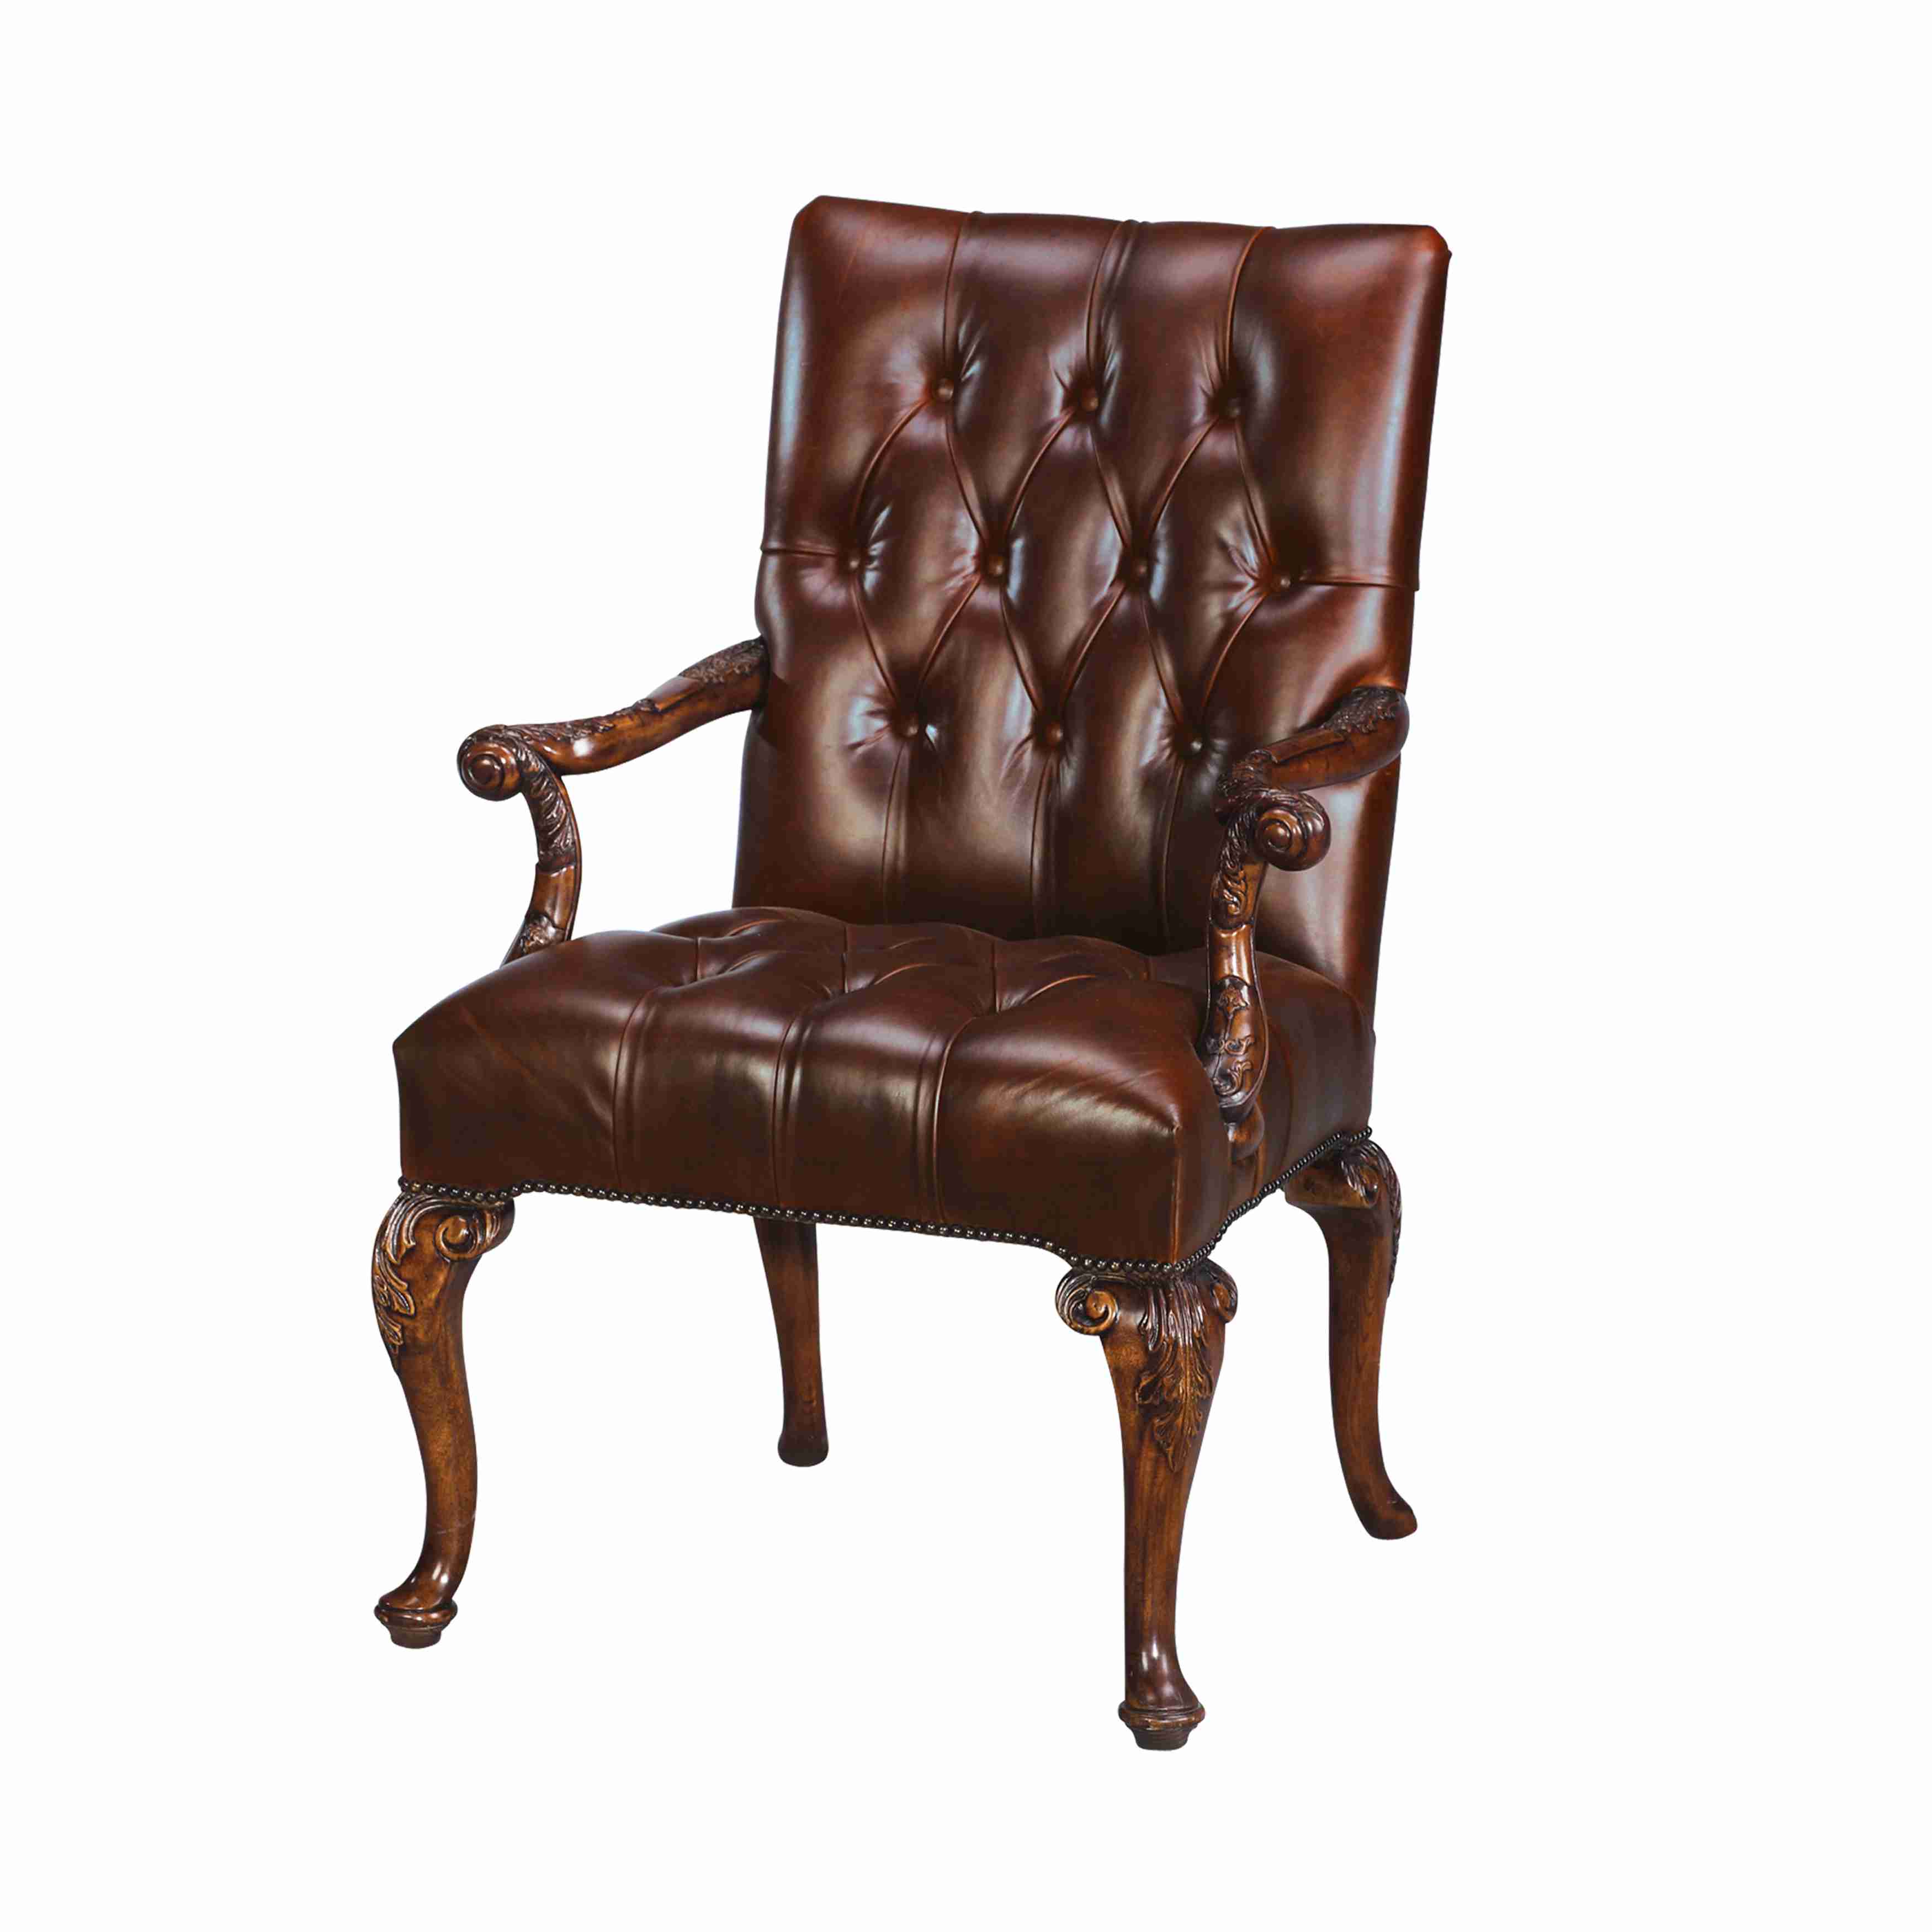 WOODEN LEATHER UPHOLSTERED ARMCHAIR